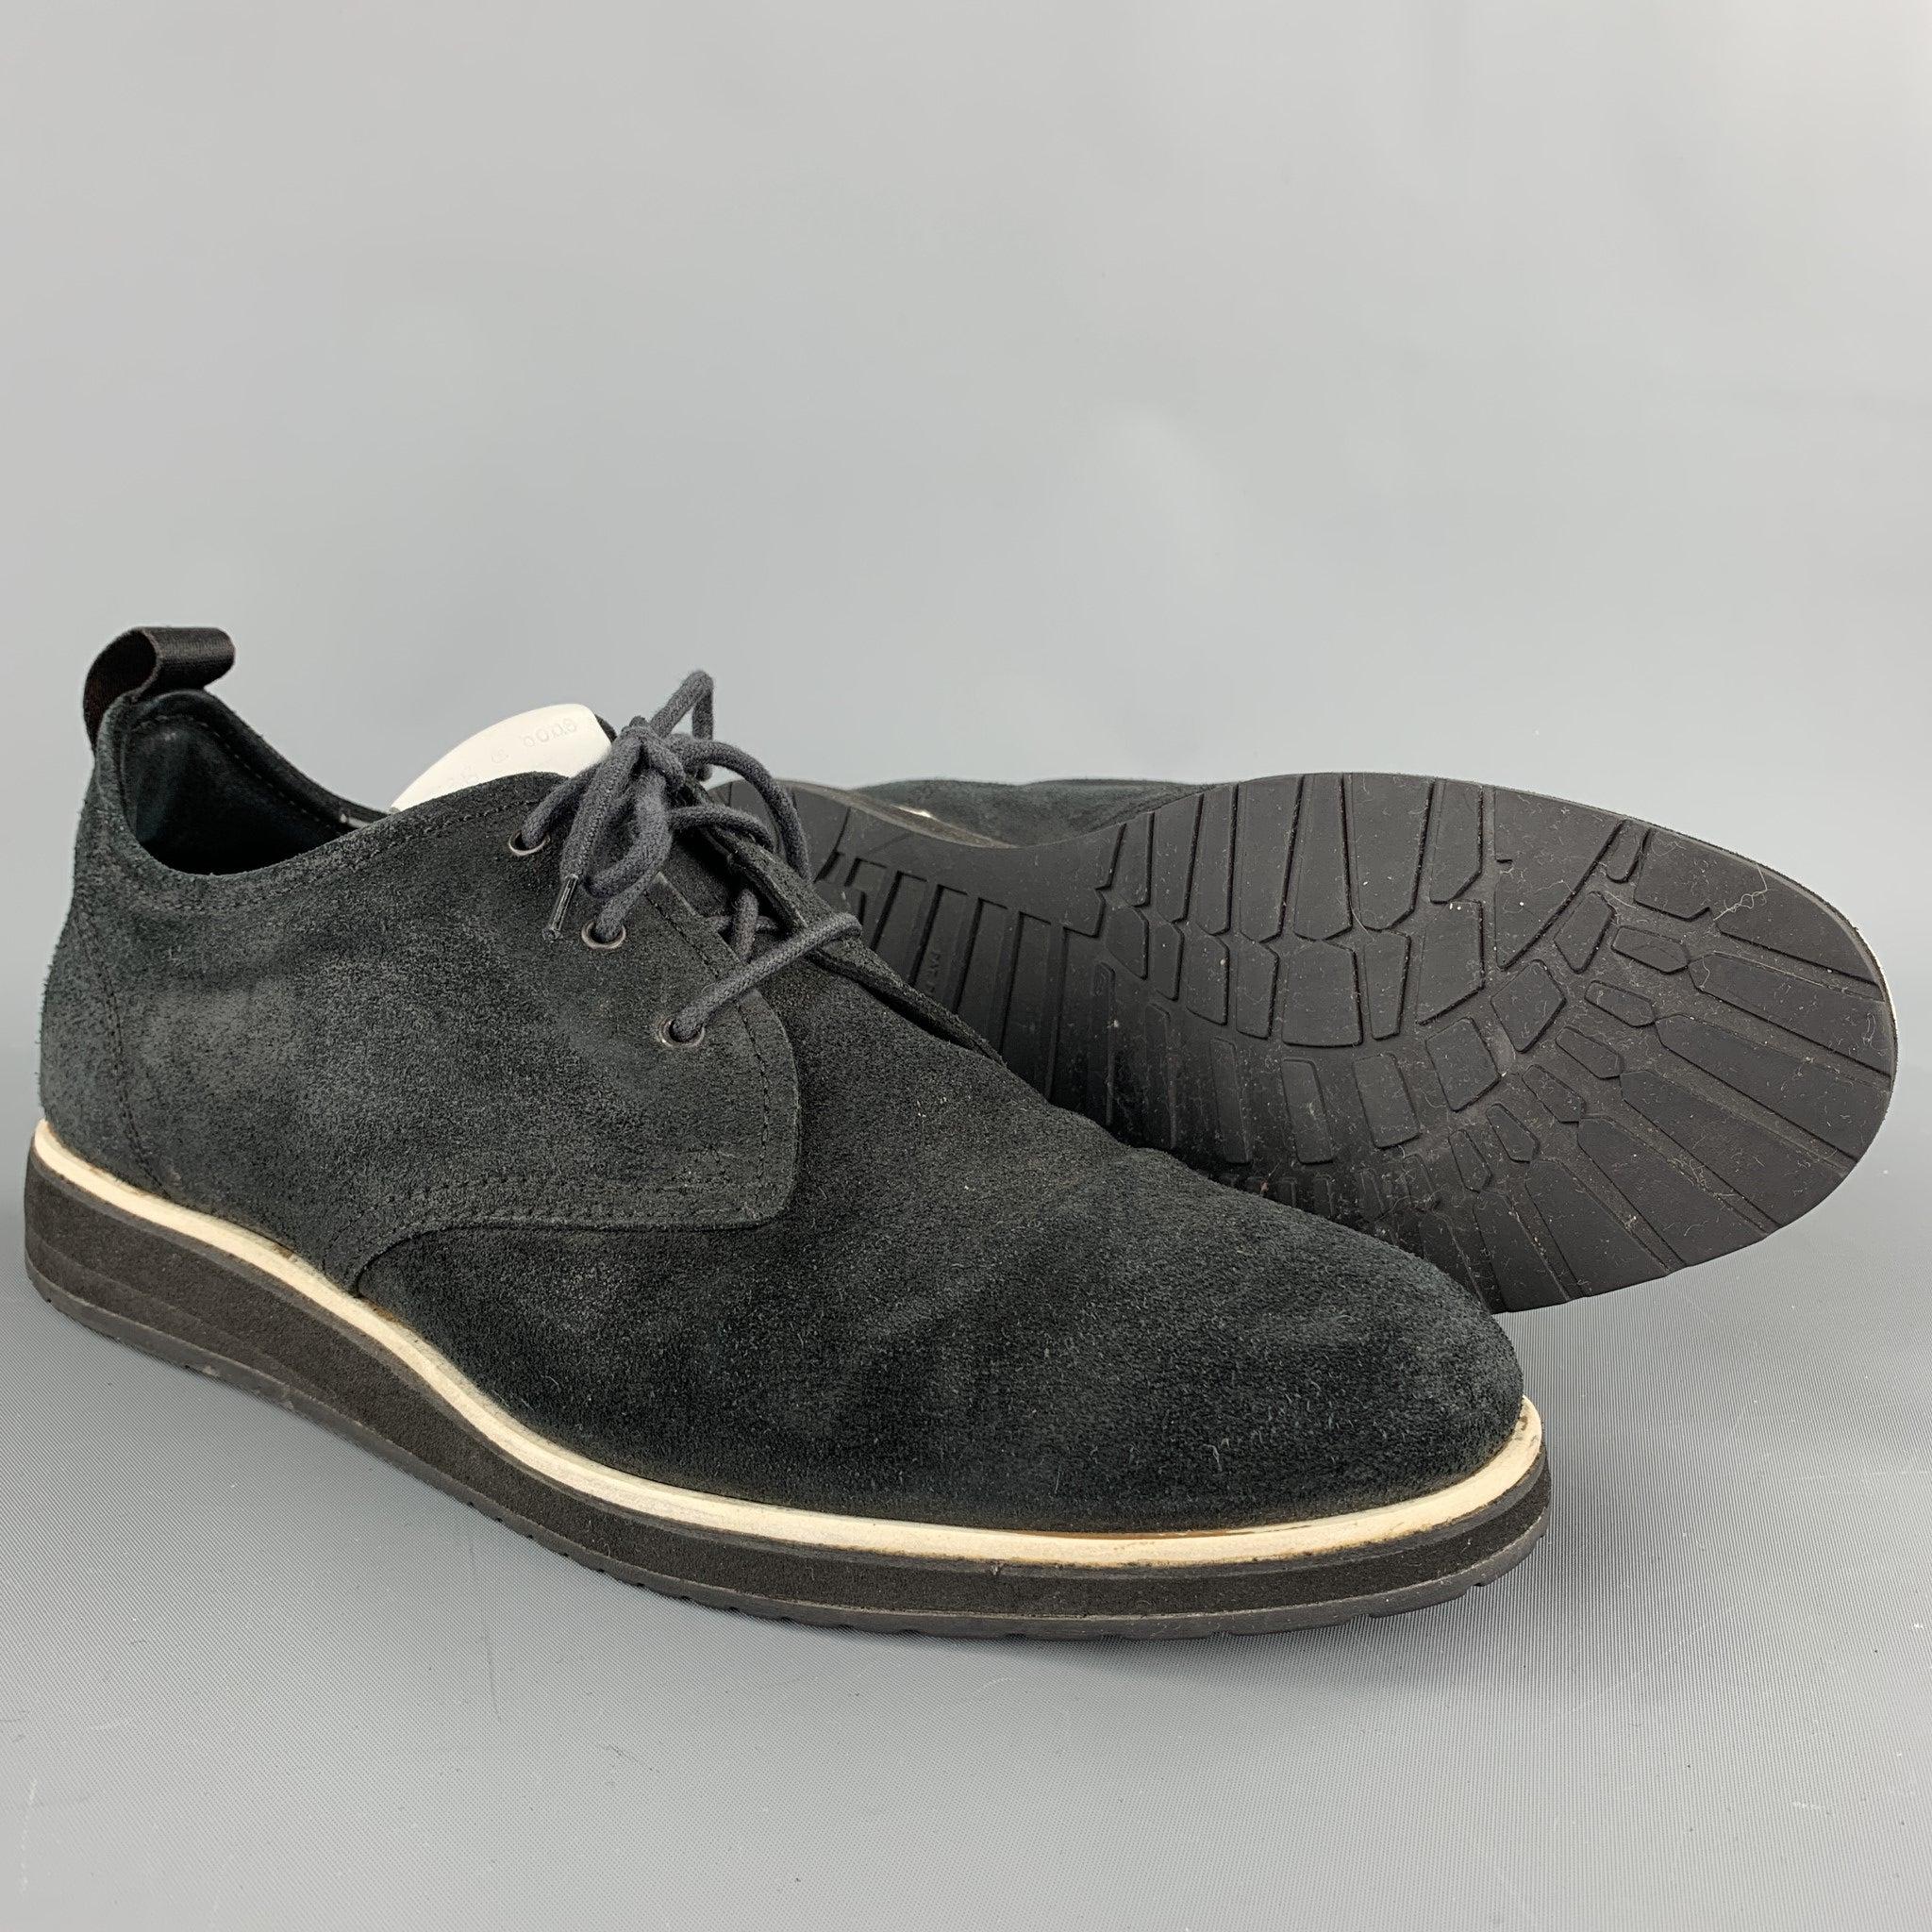 RAG & BONE Size 10 Black Suede Lace Up Shoes In Good Condition For Sale In San Francisco, CA